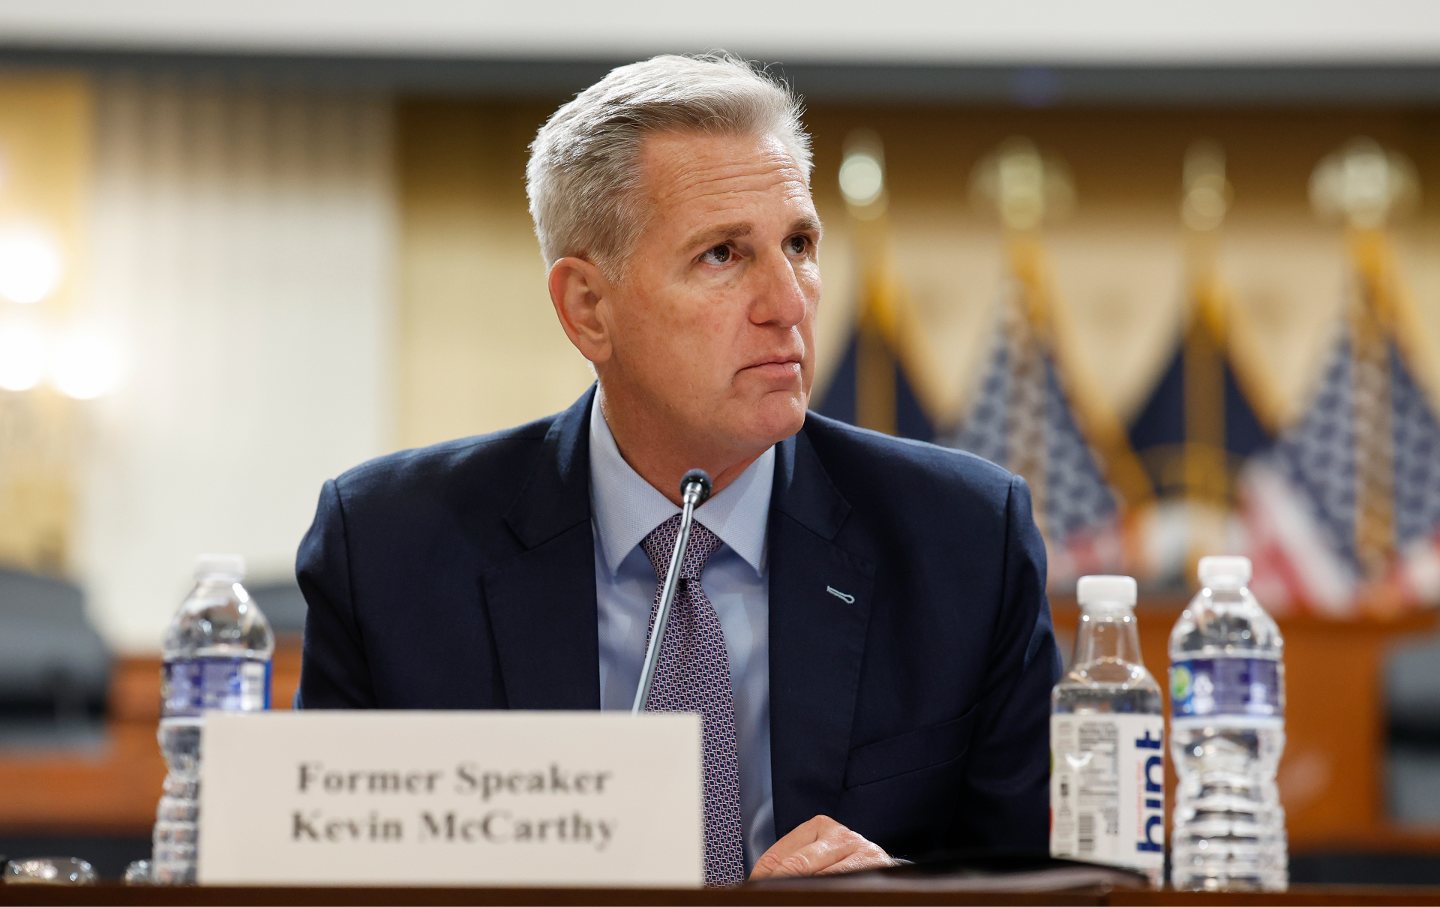 Former Speaker of the House Rep. Kevin McCarthy (R-CA) listens during a press conference with members of the House Select Committee on the Chinese Communist Party at the Cannon House Office Building on November 15, 2023.